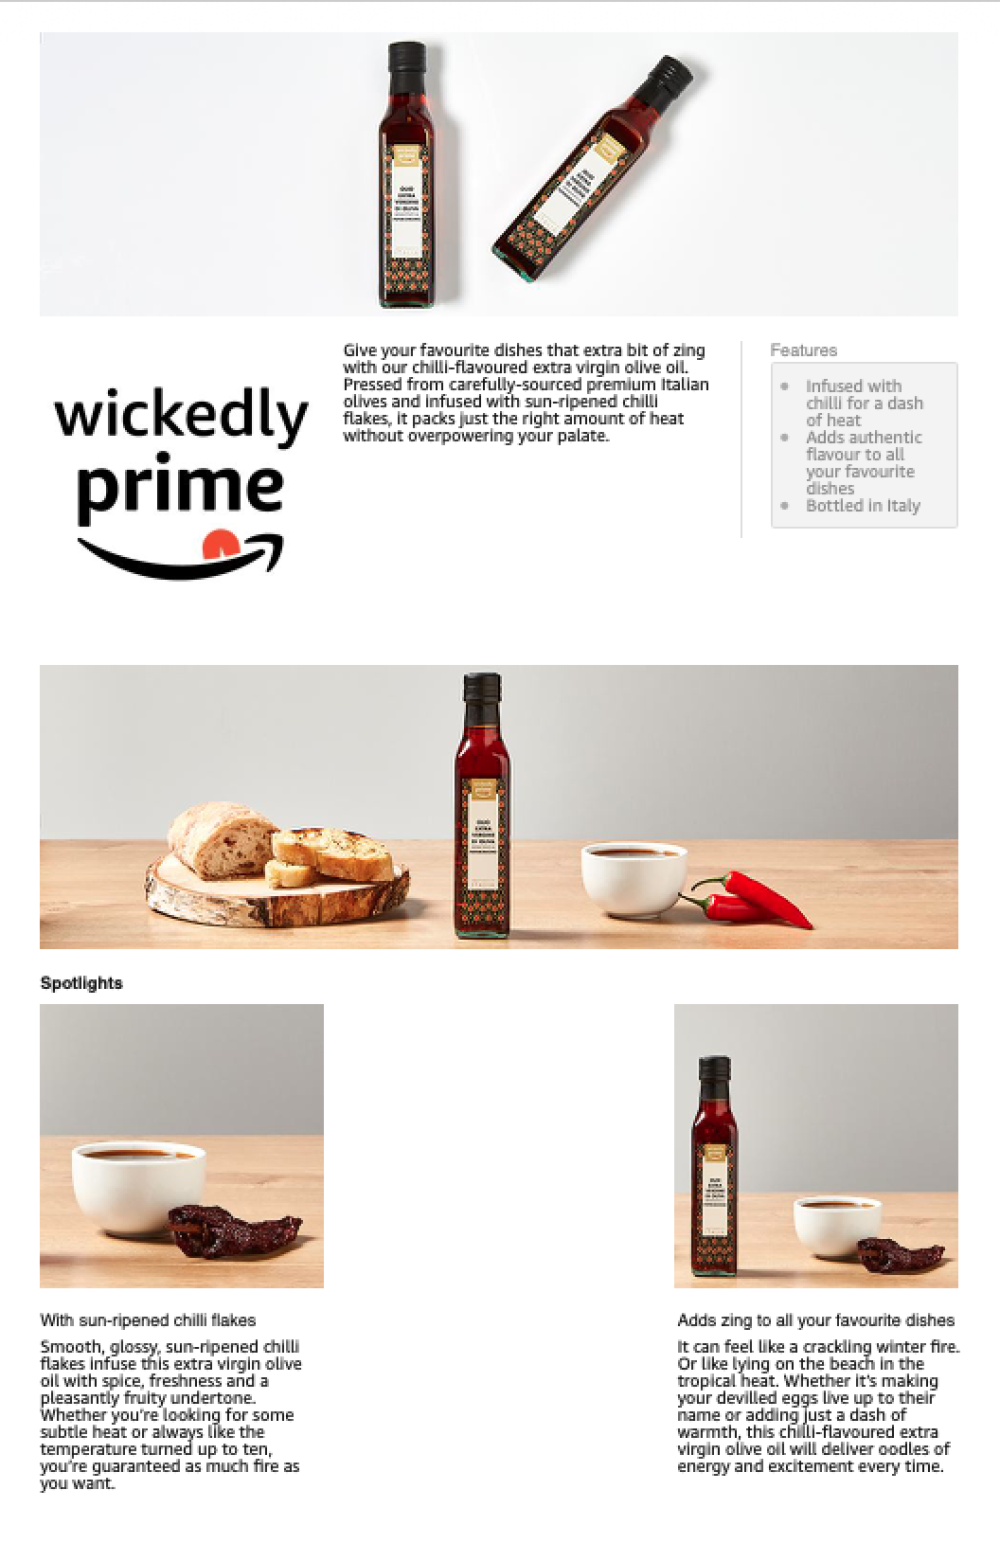 More copy for Amazon's Wickedly Prime food brand.